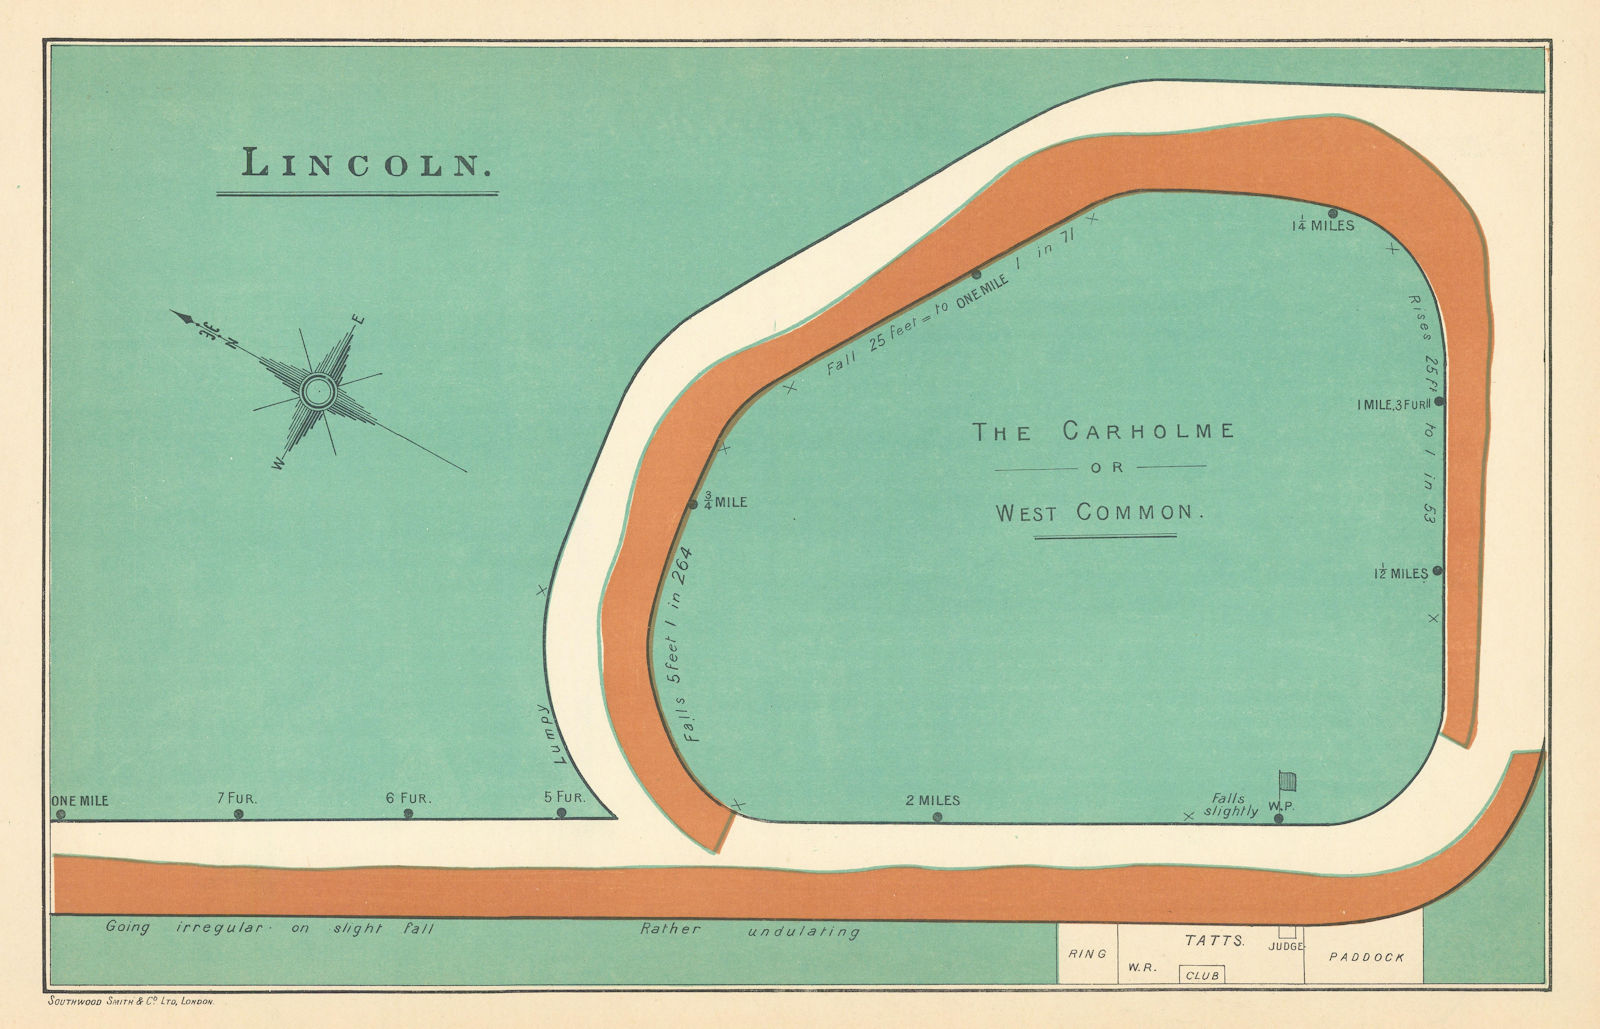 Lincoln racecourse Lincolnshire Carholme/West Common. Shut 1964. BAYLES 1903 map